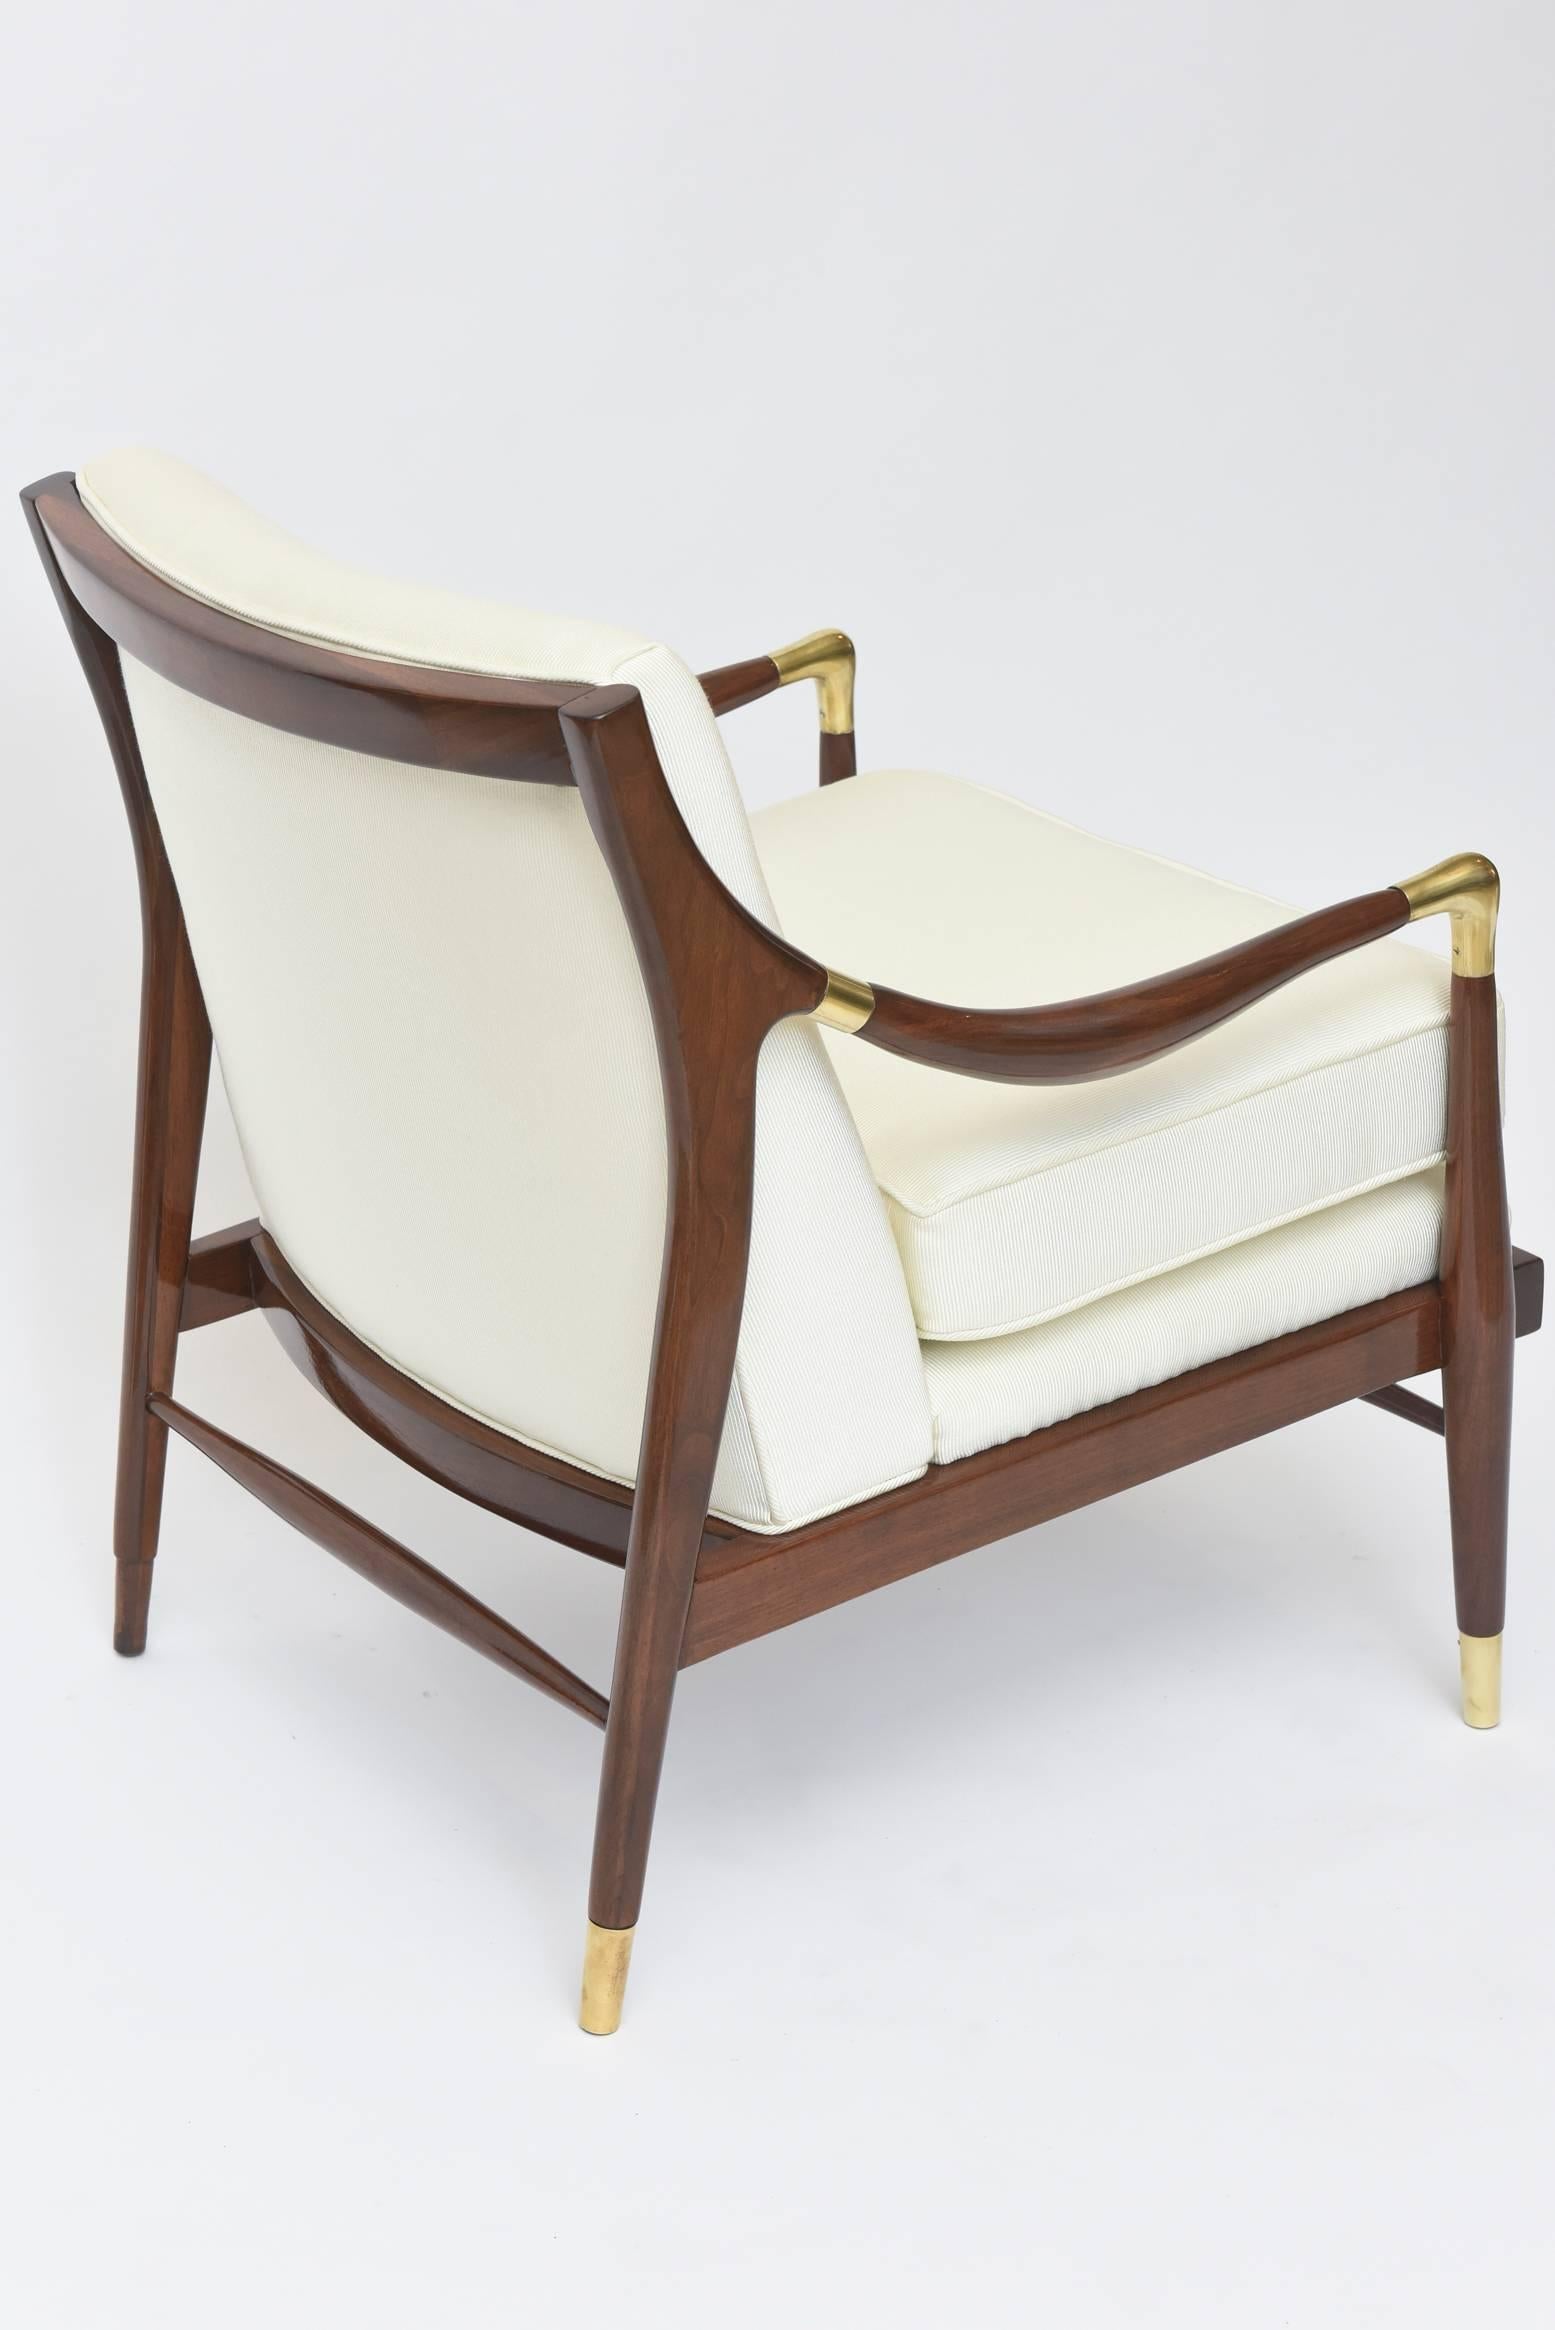 Italian Modern Mahogany and Brass Arm/Lounge Chair, Style of Ponti 2